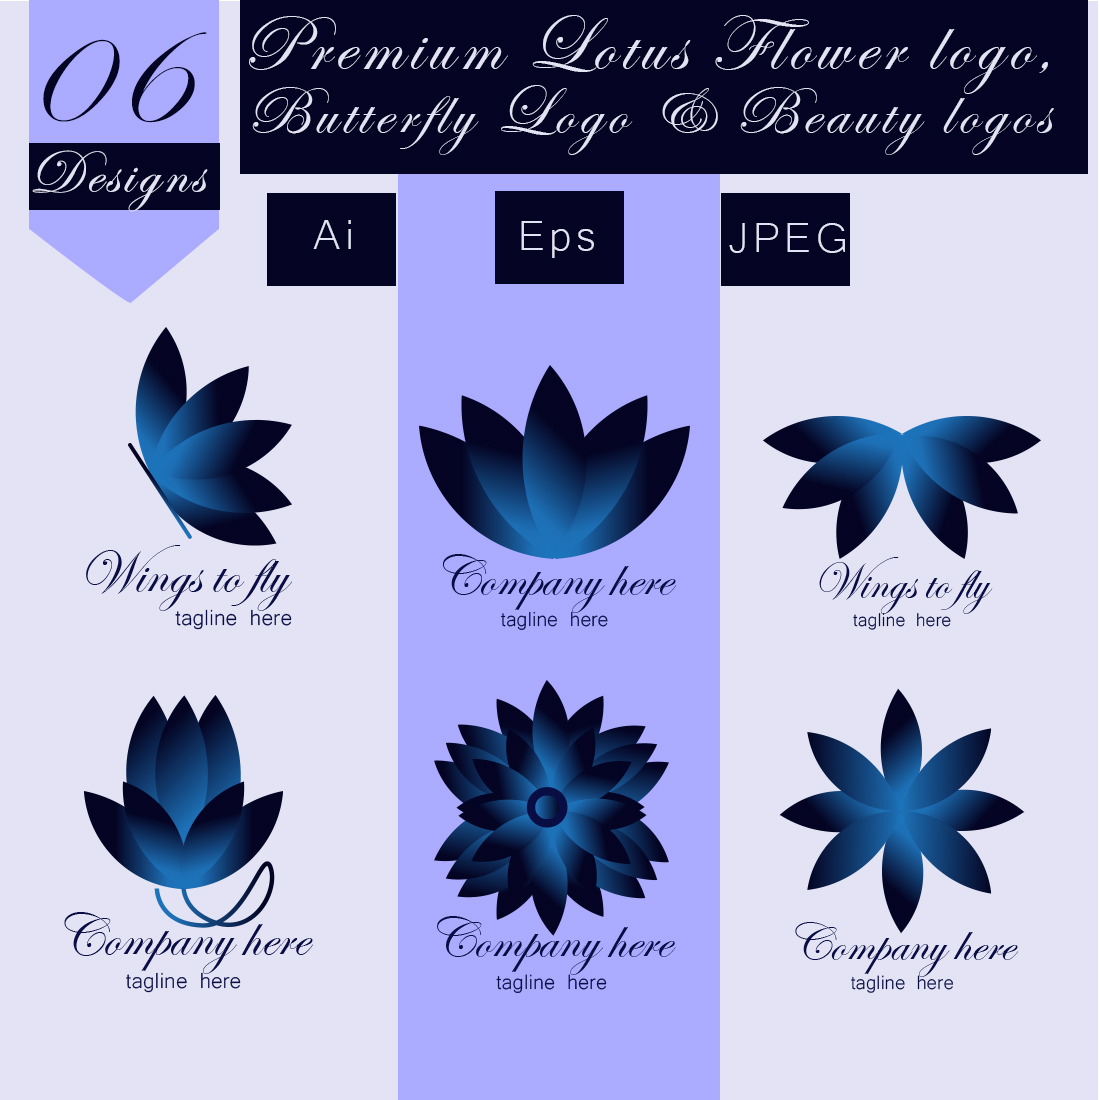 6 Premium Lotus Flower, butterfly Logo, Fashion Logos & Beauty Logos for your brand or Fashion company with Luxury Blue color preview image.